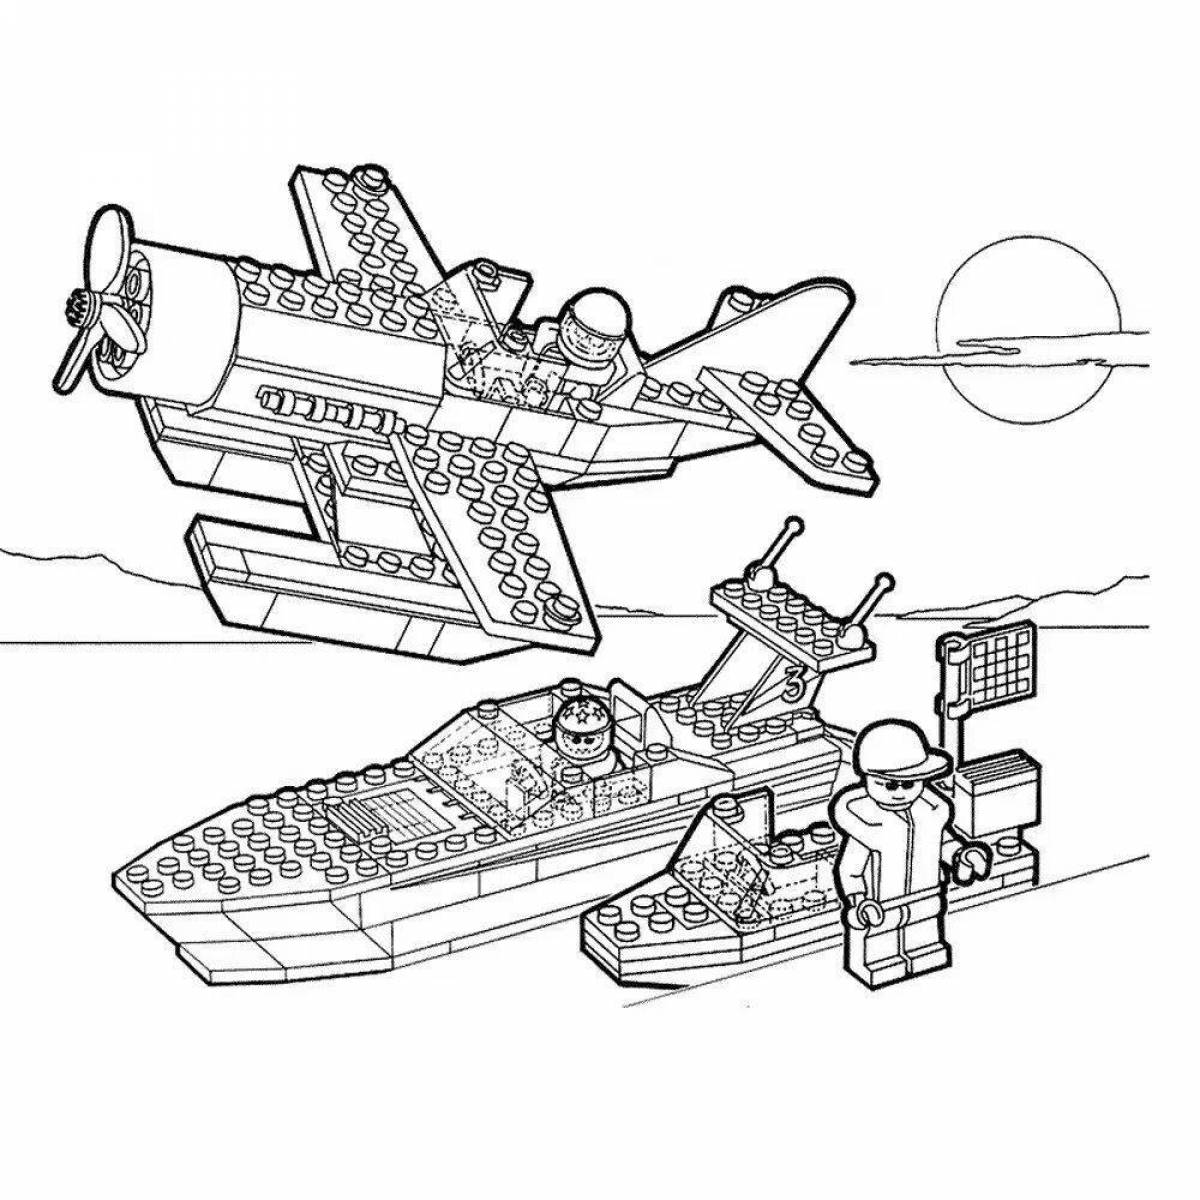 Gorgeous police ship coloring page